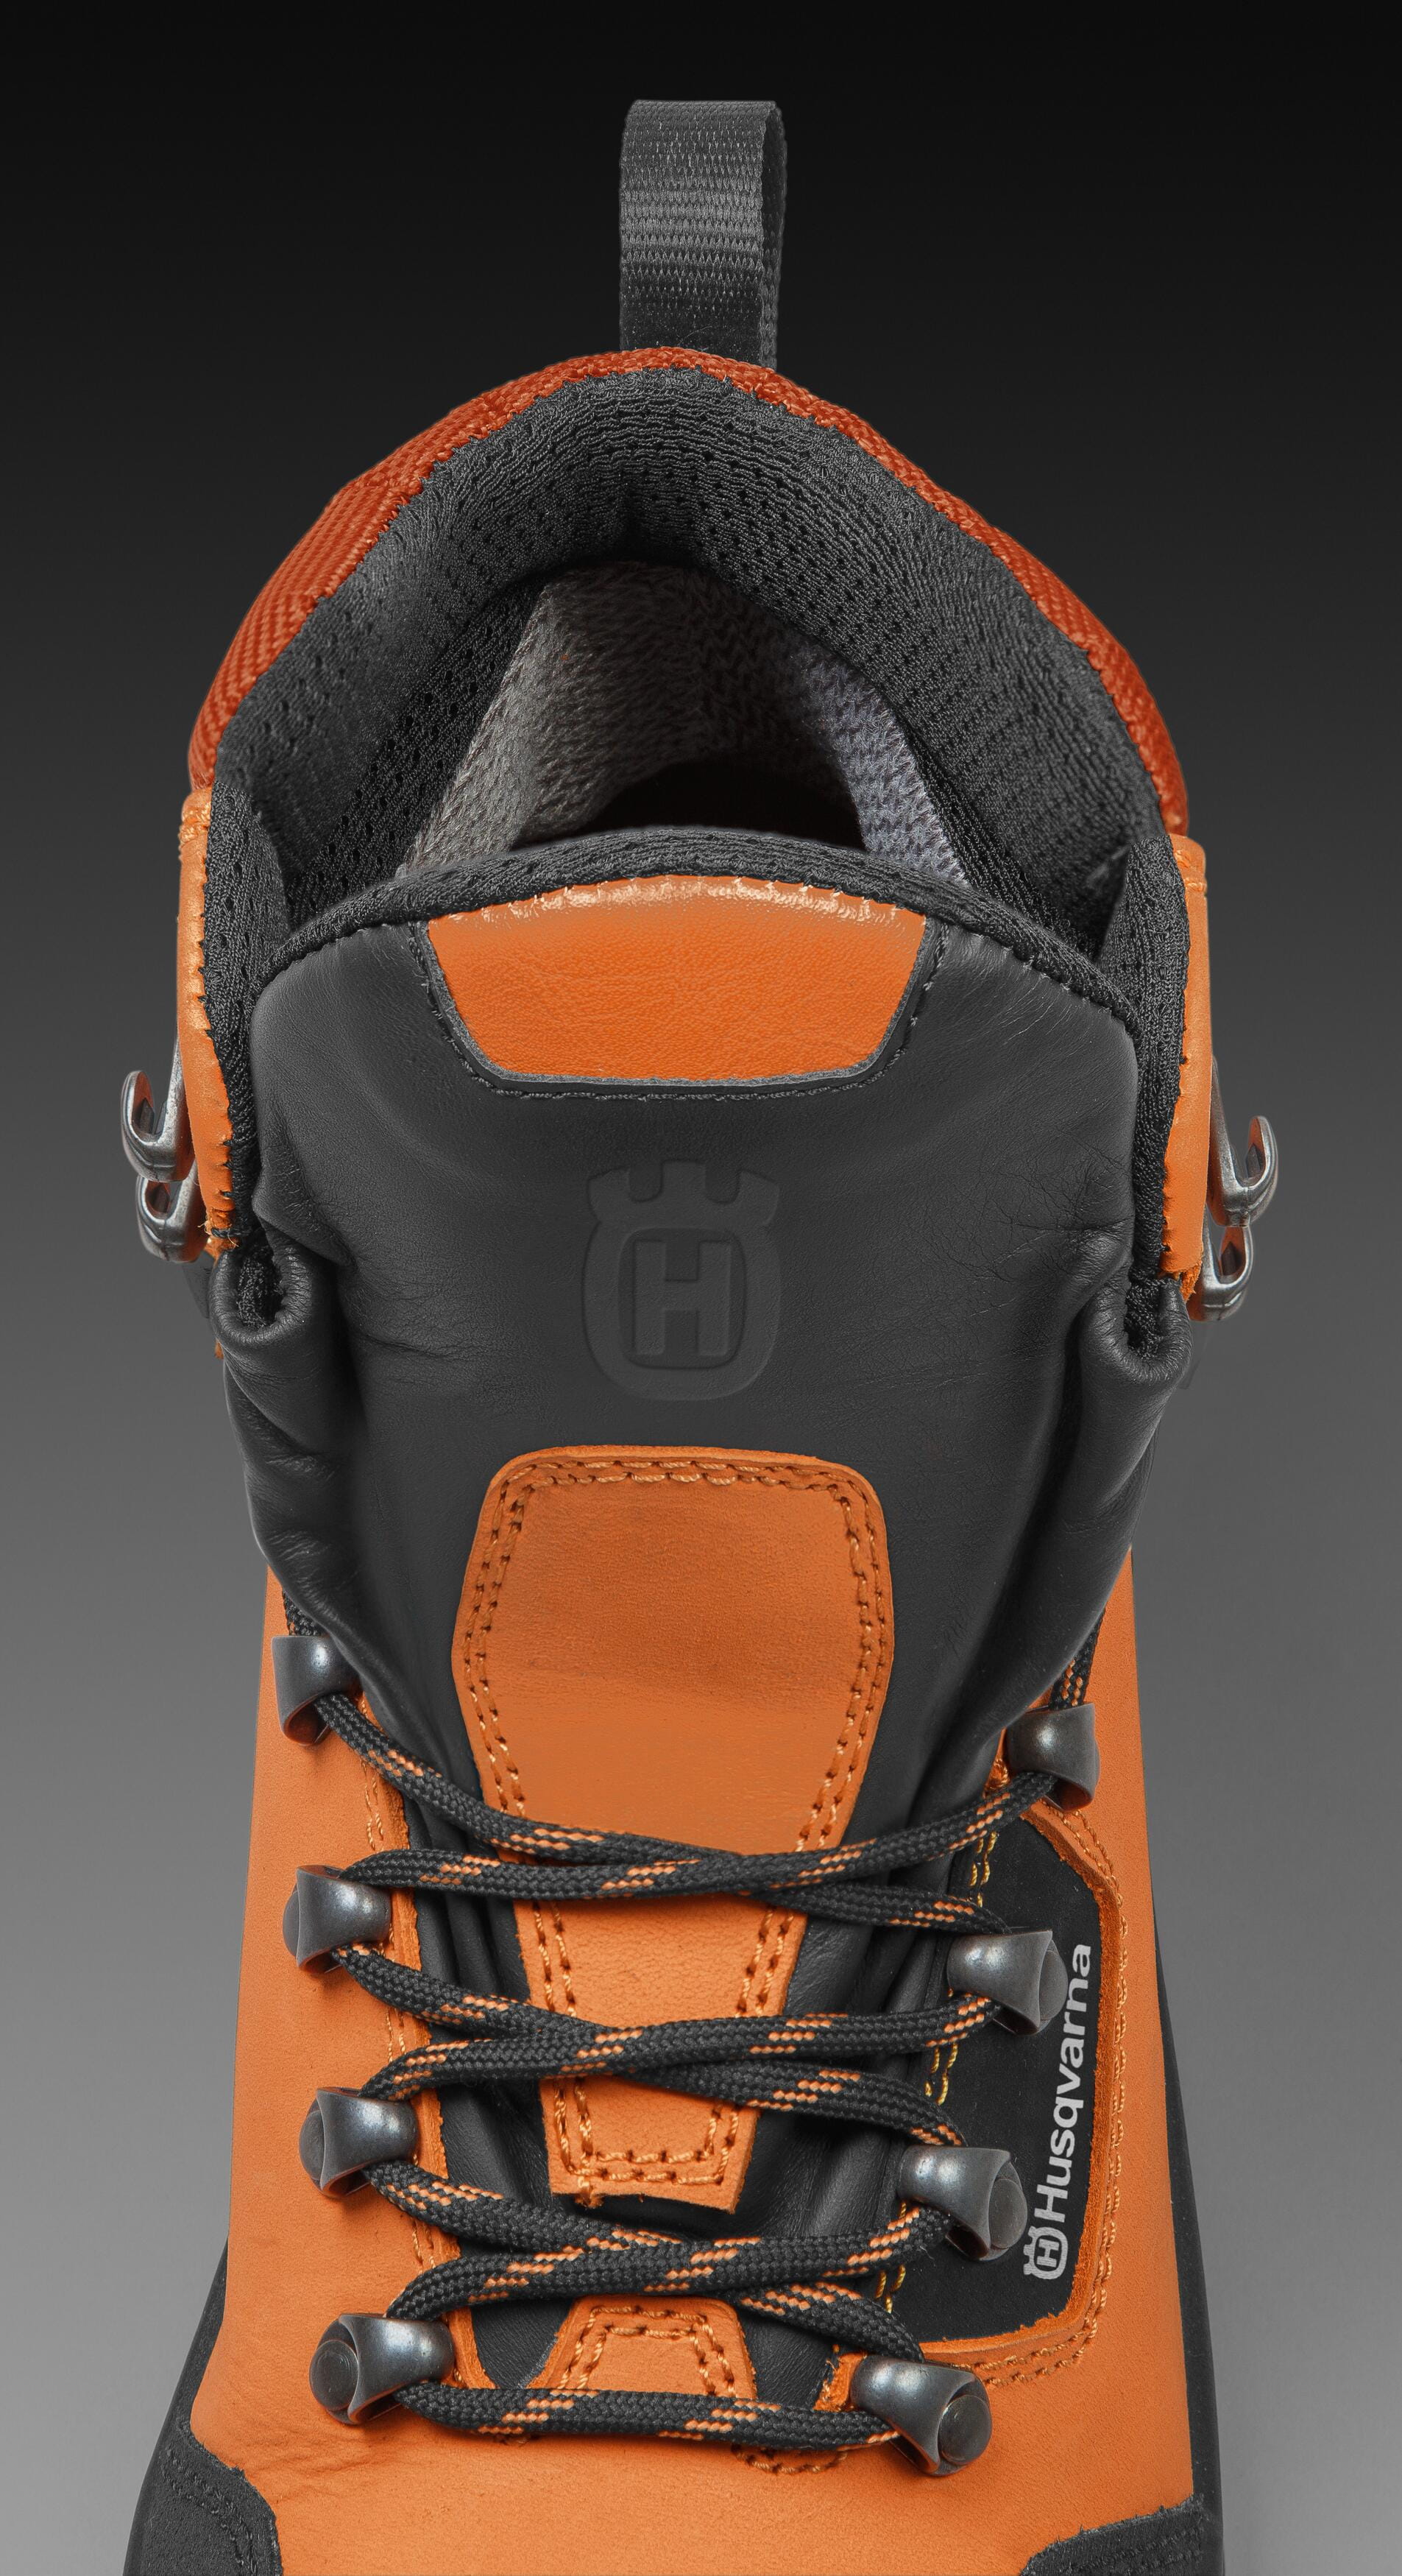 Protective Leather Boots, Technical Light, Padded Ancle and Tongue